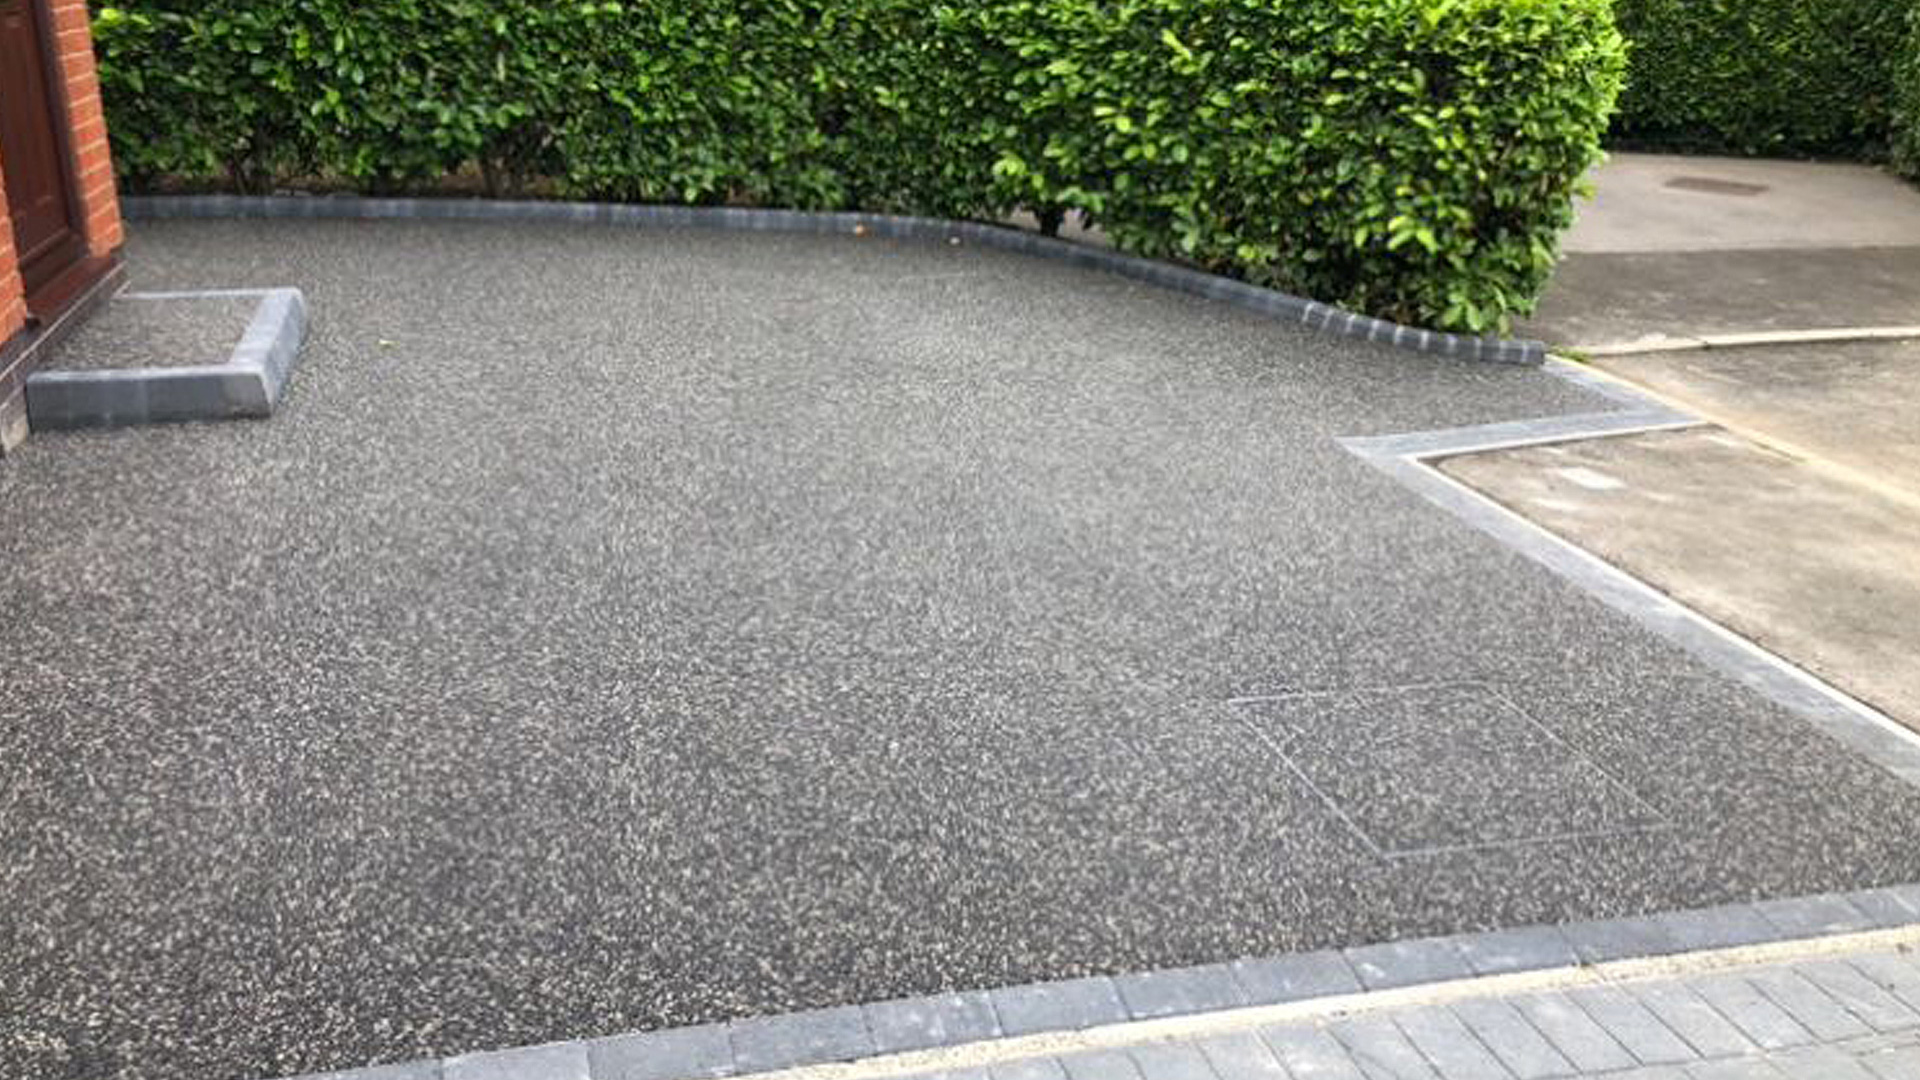 Supreme Resin Driveways - The Resin Bound aggregate system is incredibly strong and durable and will remain so for many years. This is thanks to its low maintenance, easy cleaning and high resistance to organic materials and weeds.